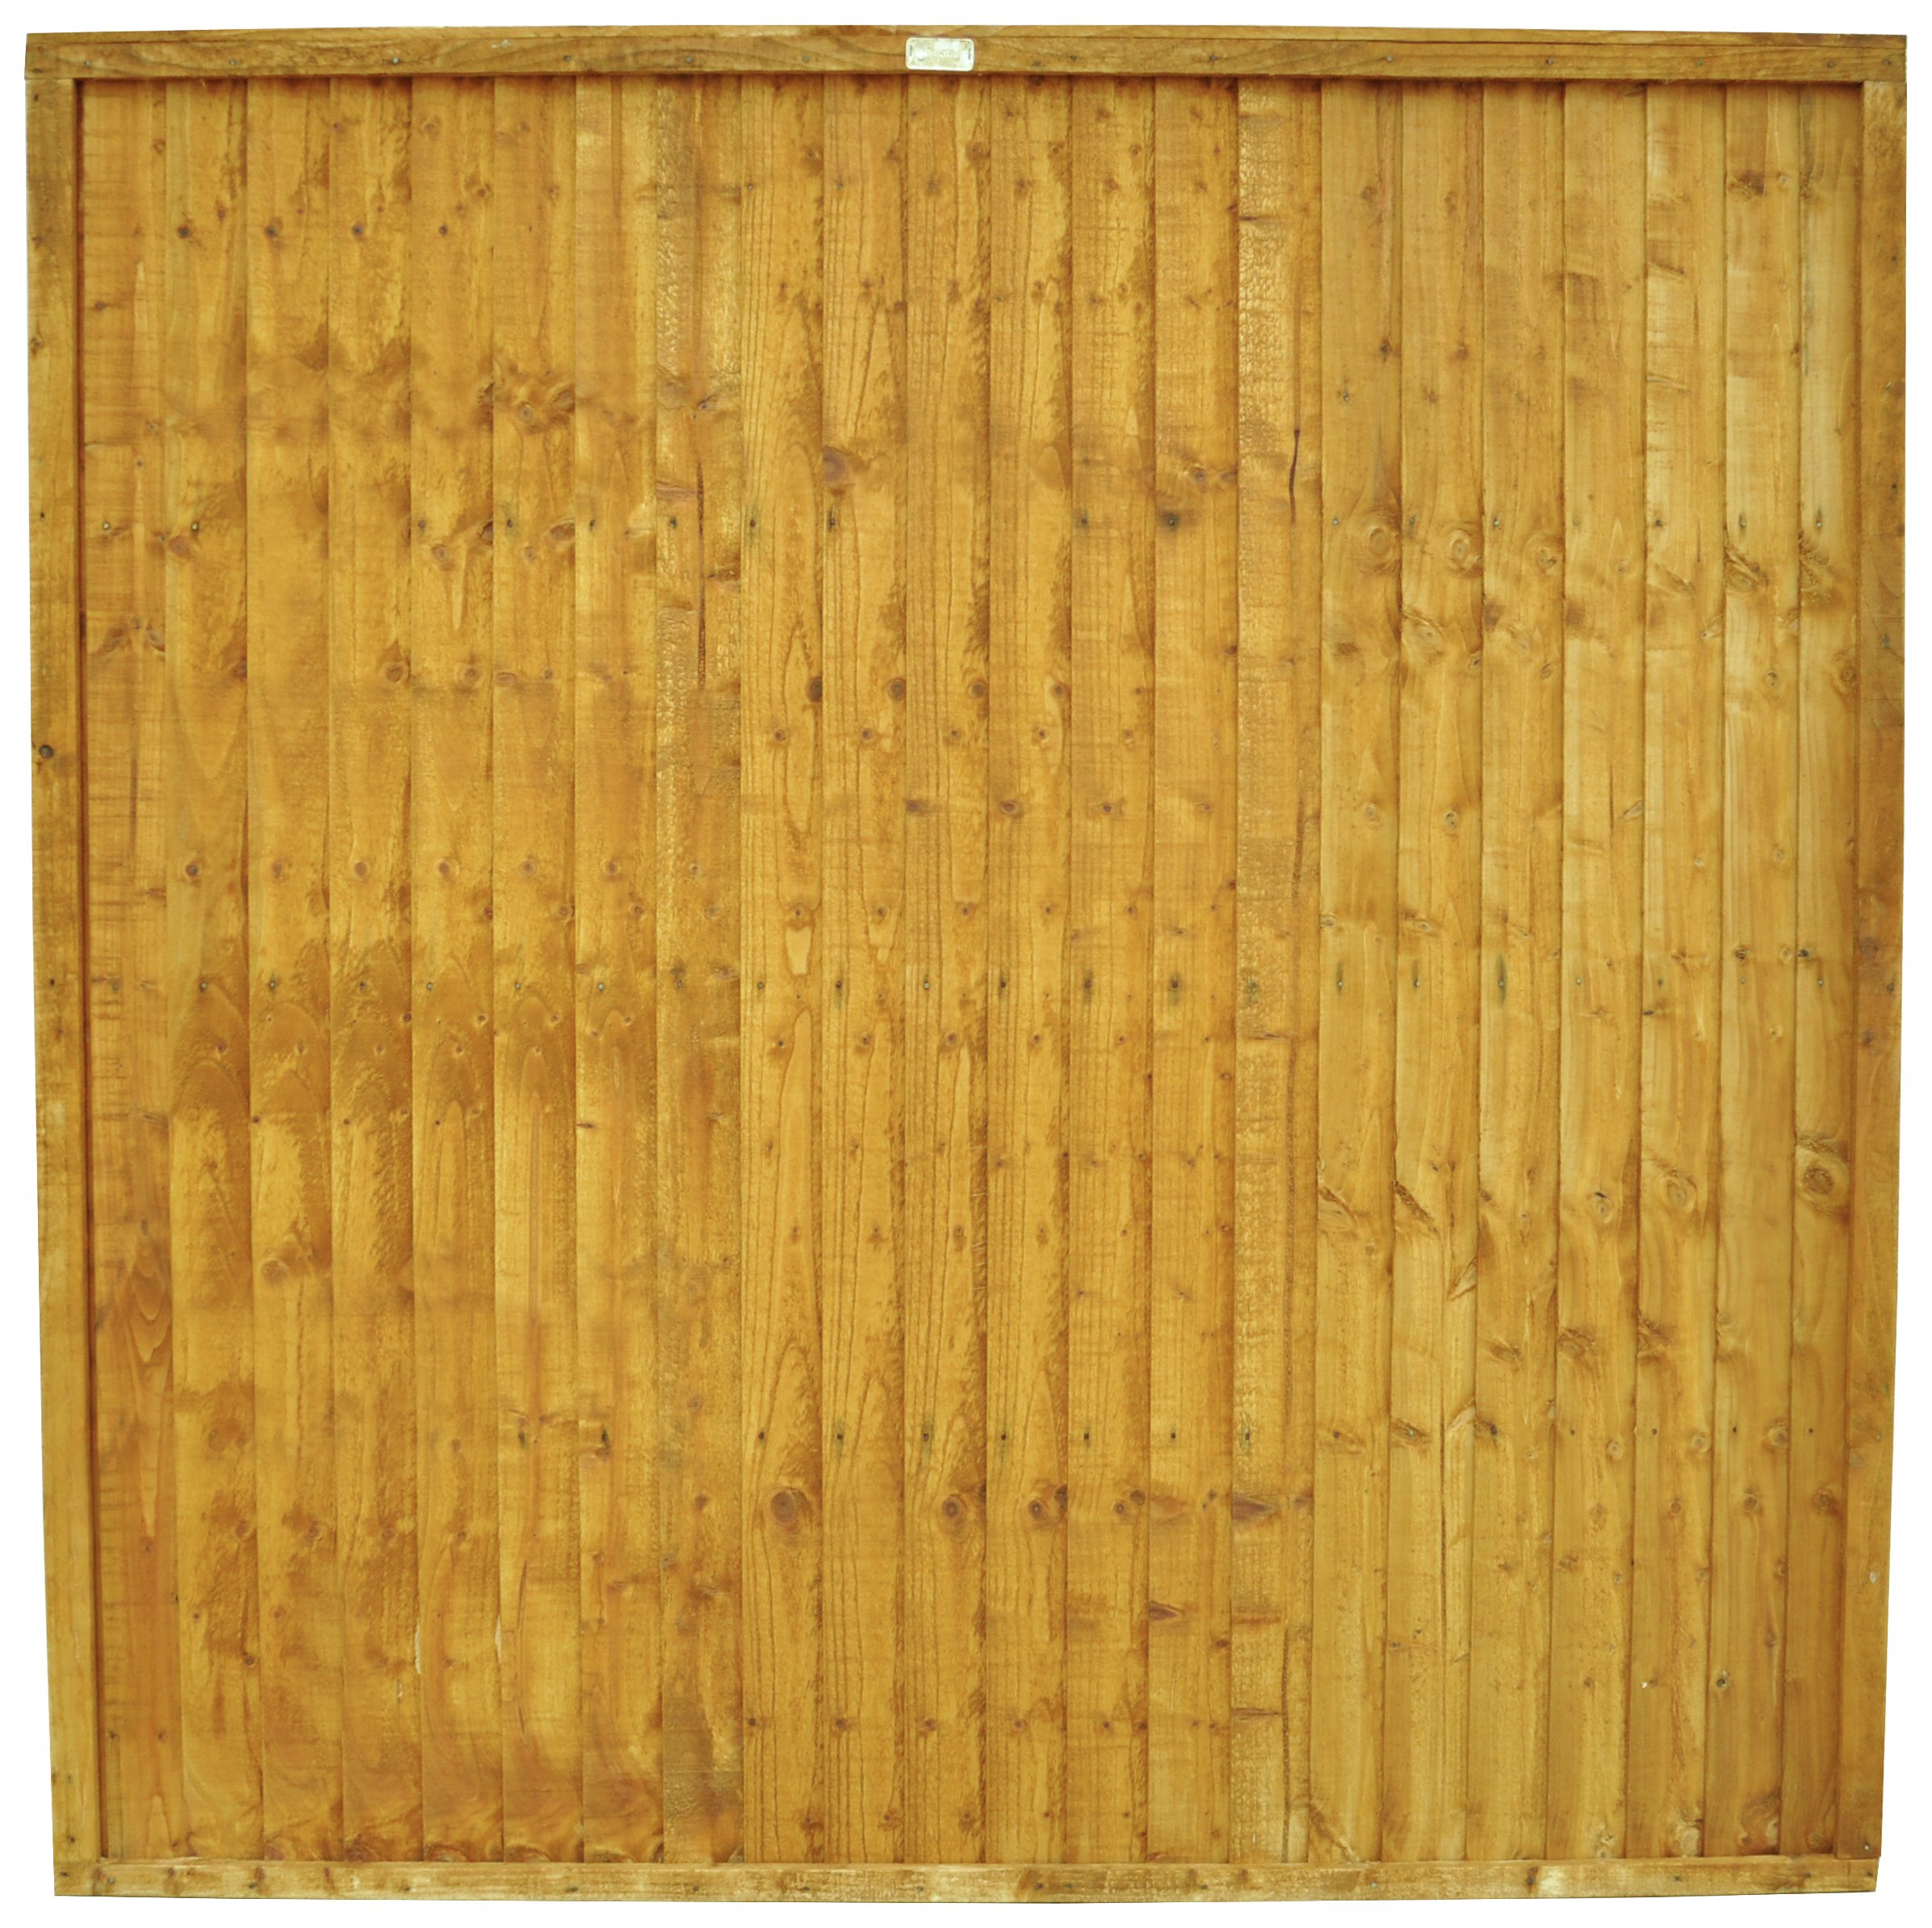 Forest 6ft (1.83m) Closeboard Fence Panel Review